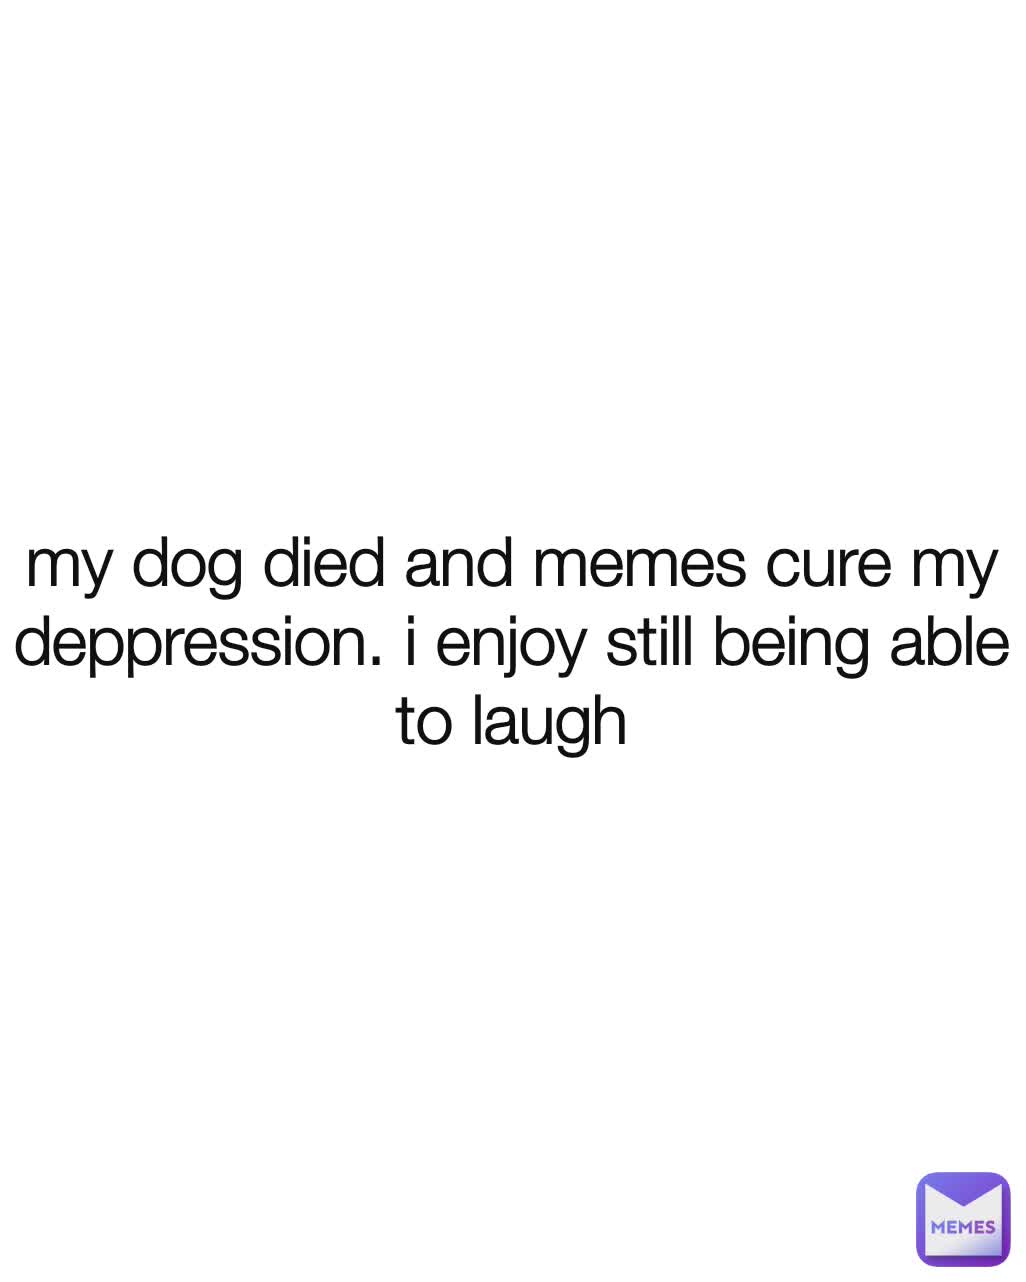 my dog died and memes cure my deppression. i enjoy still being able to laugh